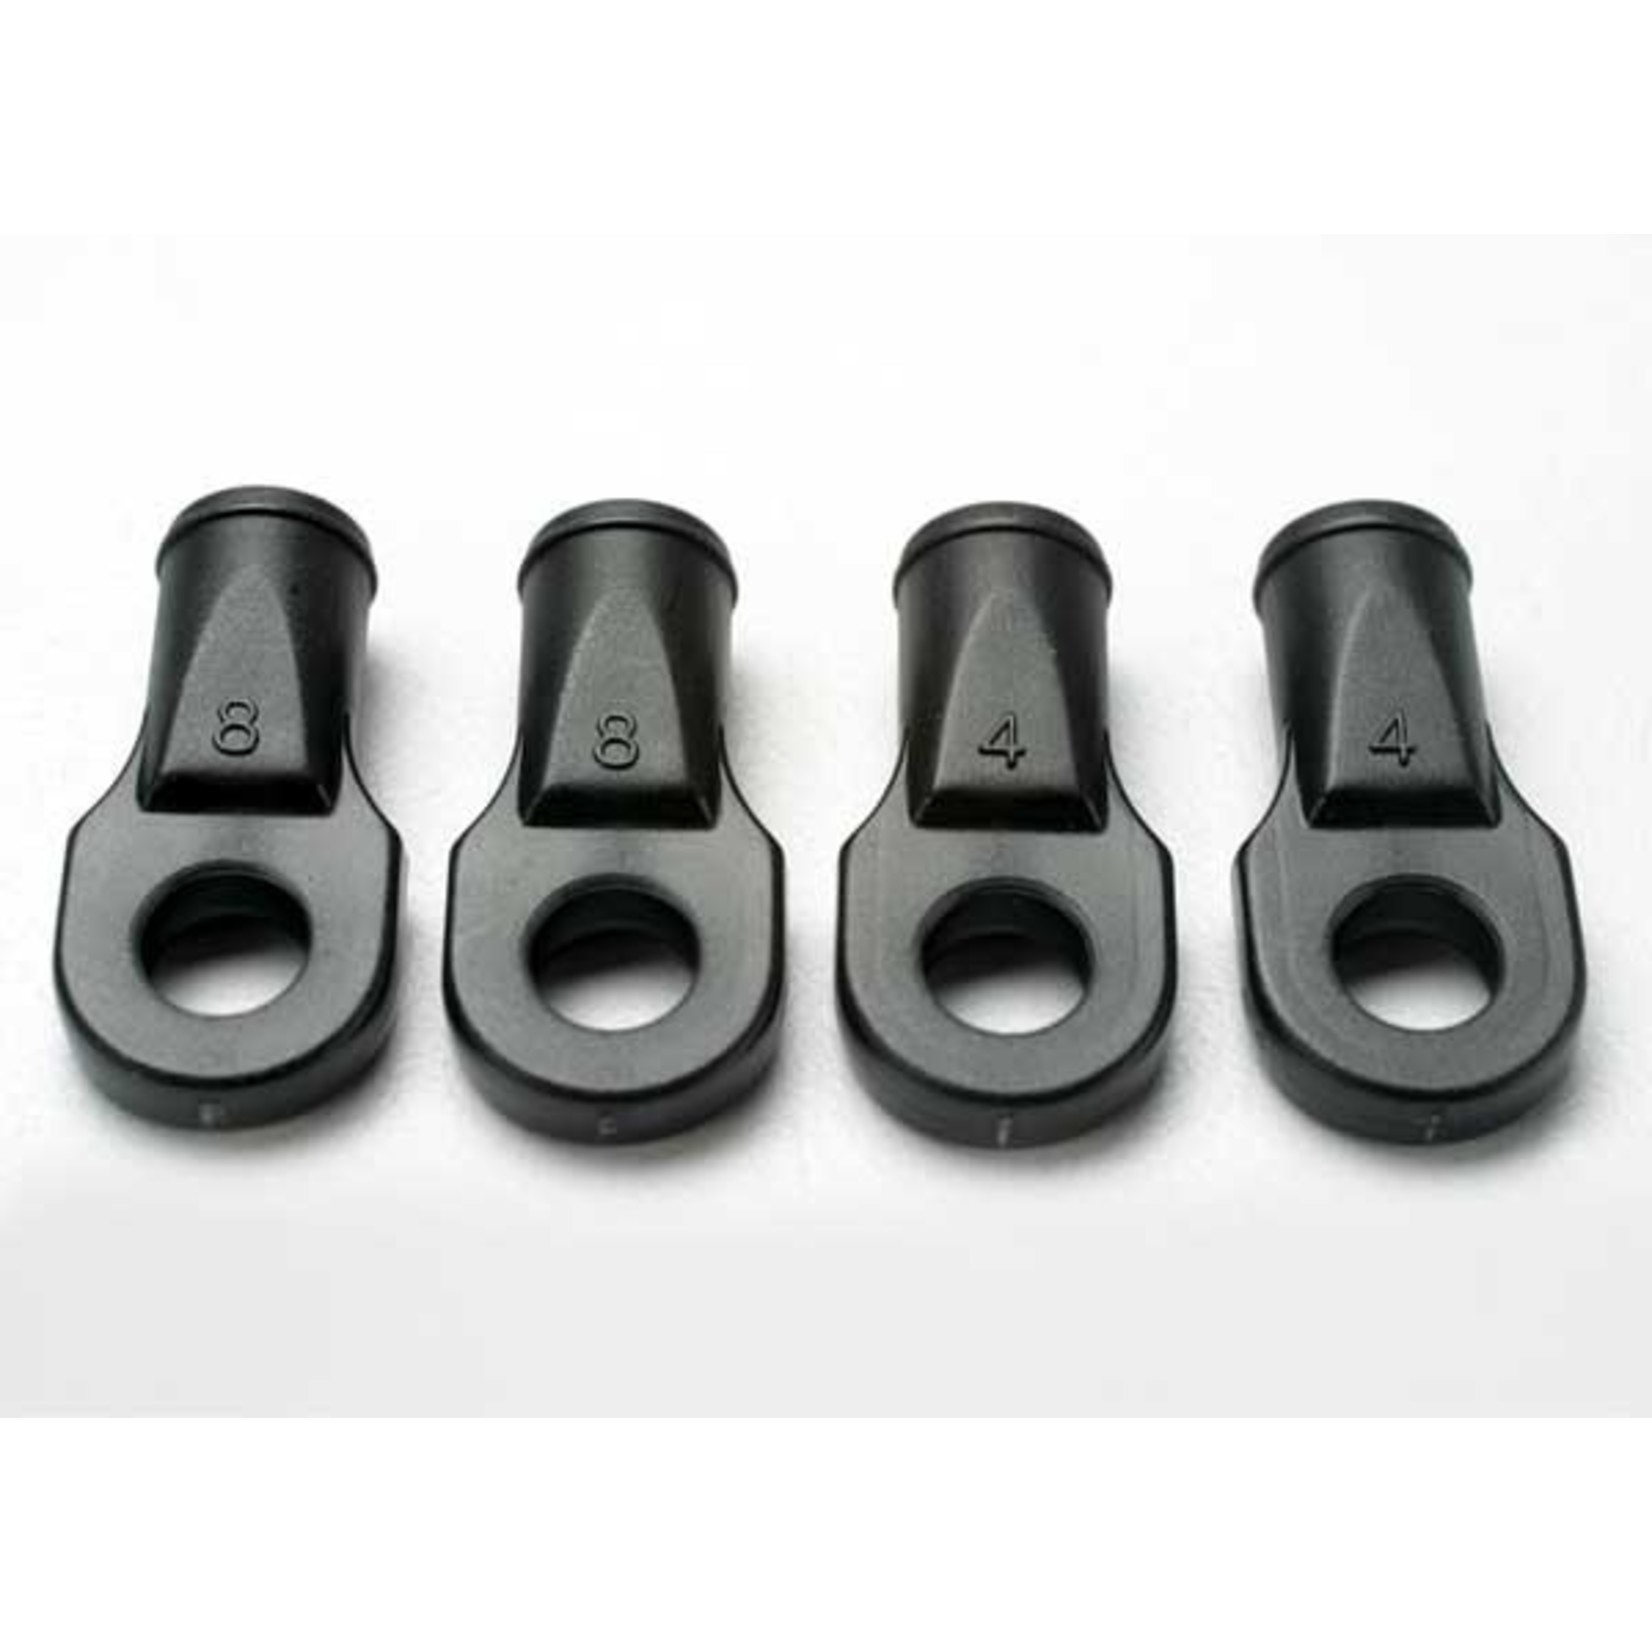 Traxxas 5348 - Rod ends, Revo (large, for rear toe link on